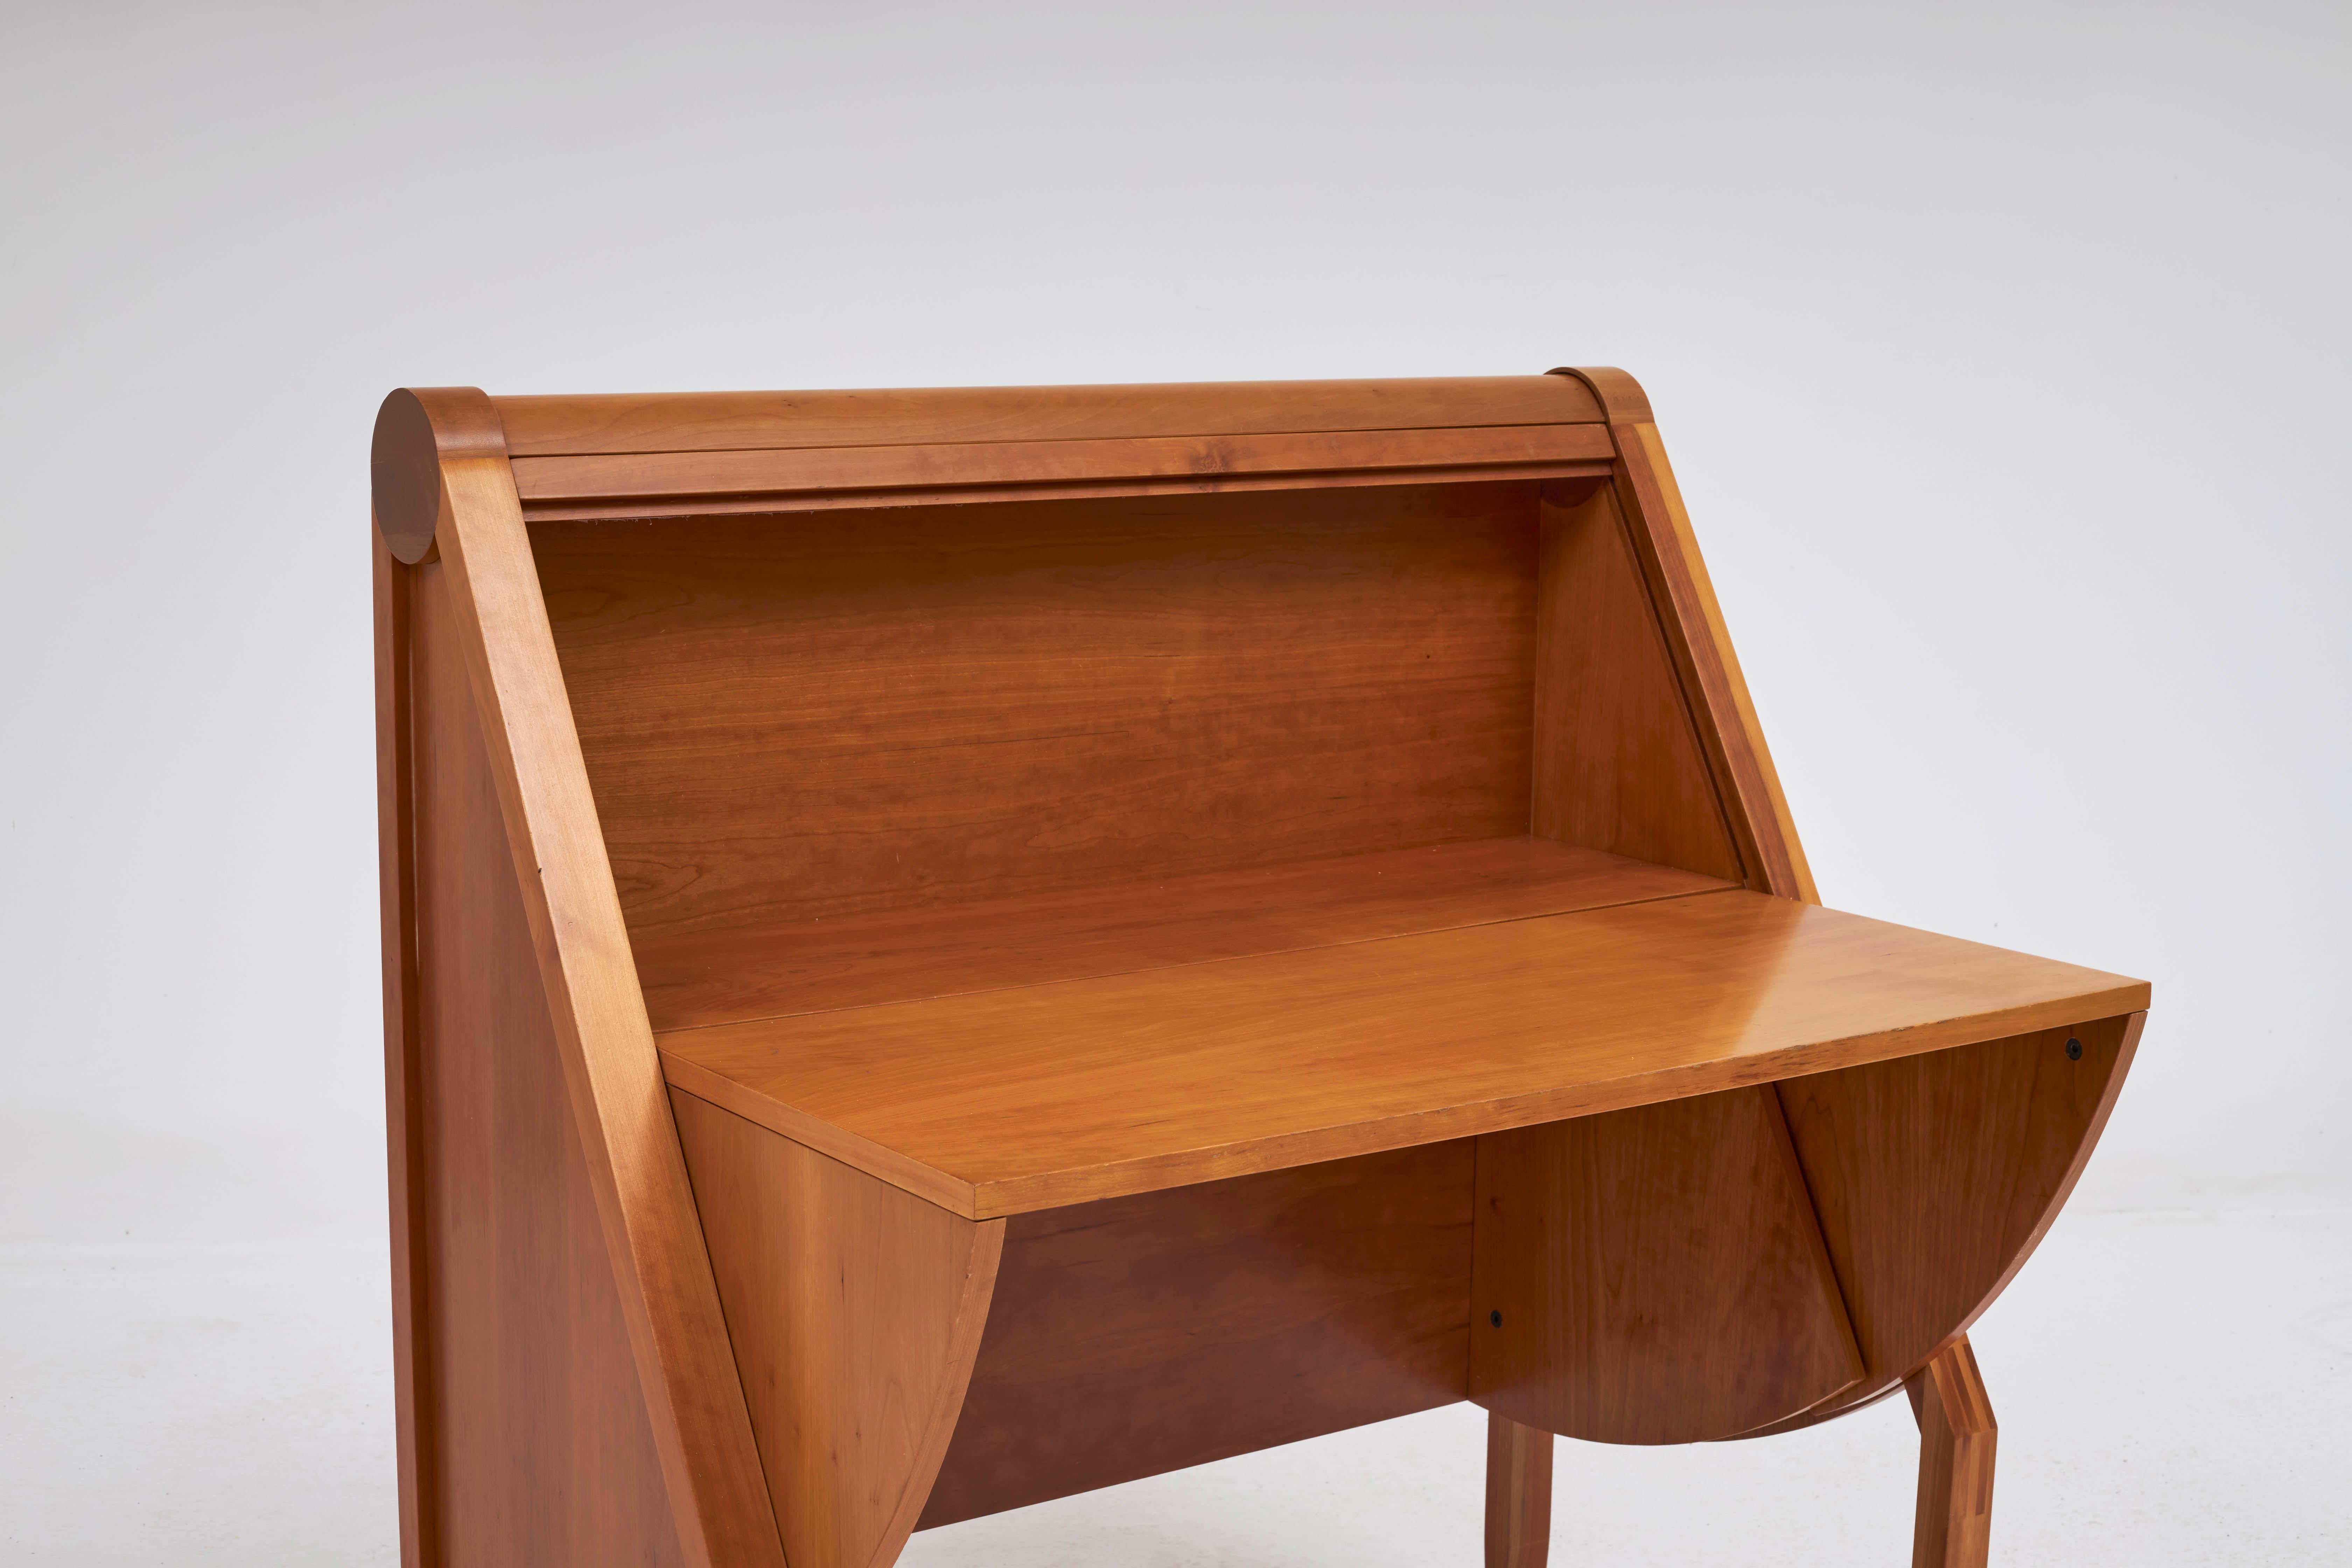 Compass Writing Desk Bureau by Pedro Miralles Claver for Punt Mobles, circa 1990 In Excellent Condition For Sale In London, GB